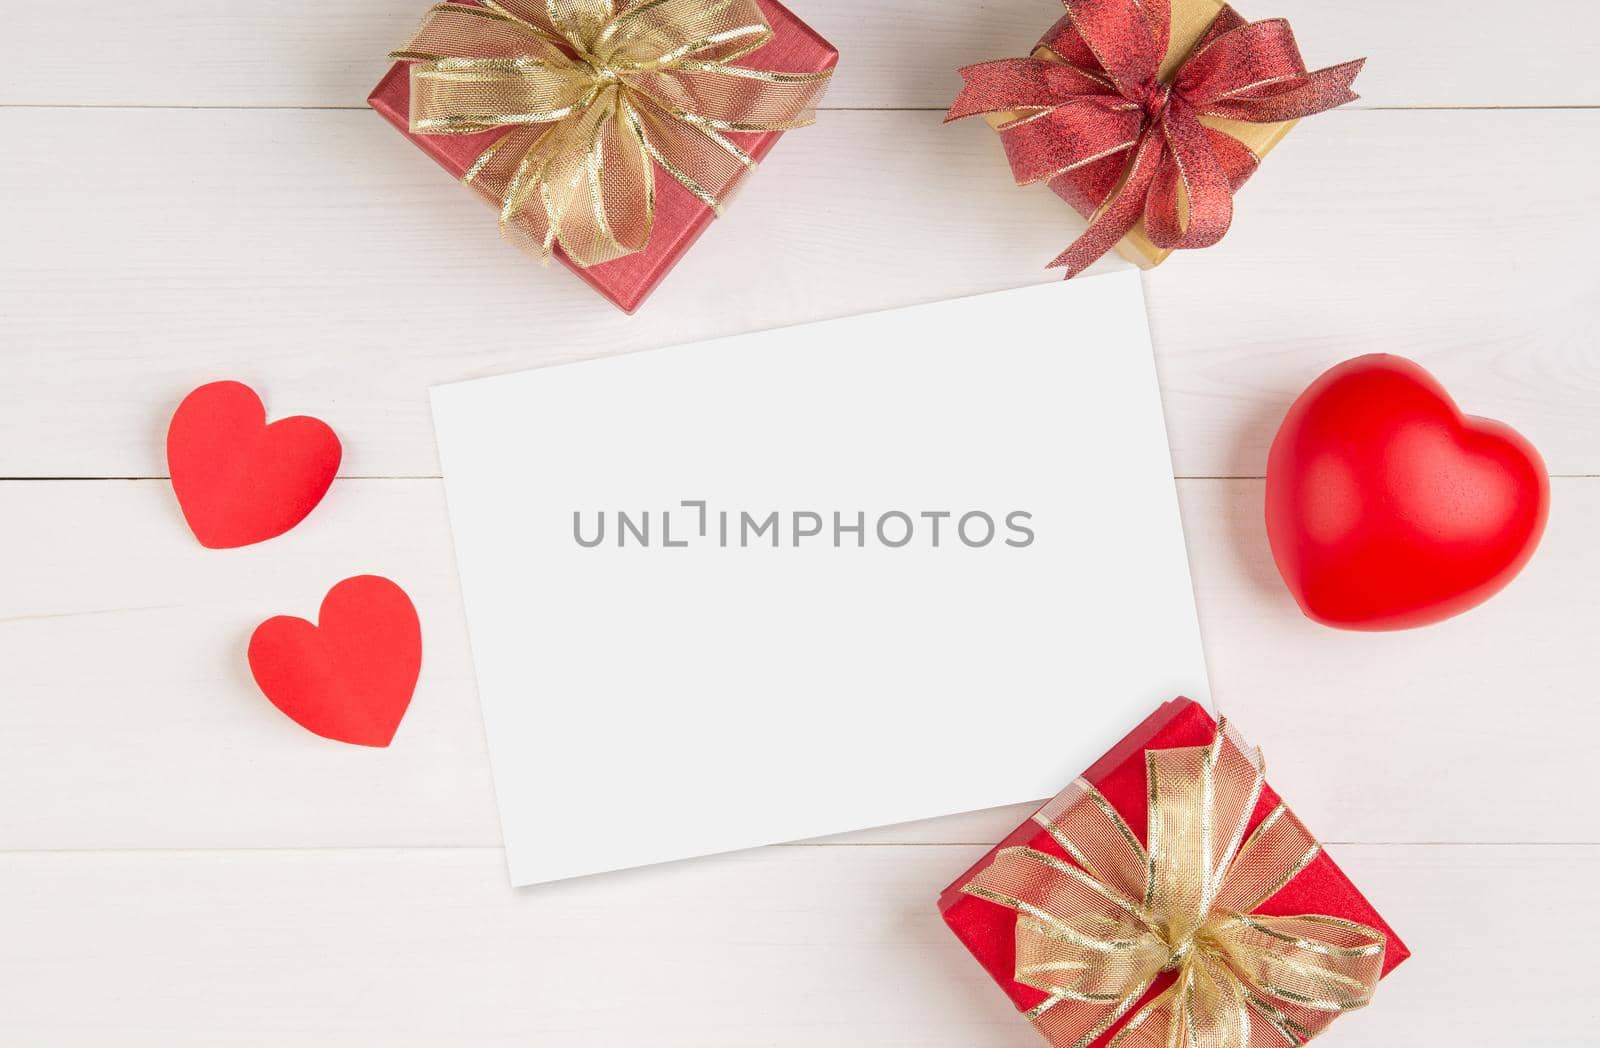 Blank postcard size a5 and letter and gift box and heart shape on wooden table, mockup greeting card and template, decoration with romantic, celebration Valentine day and holiday concept.